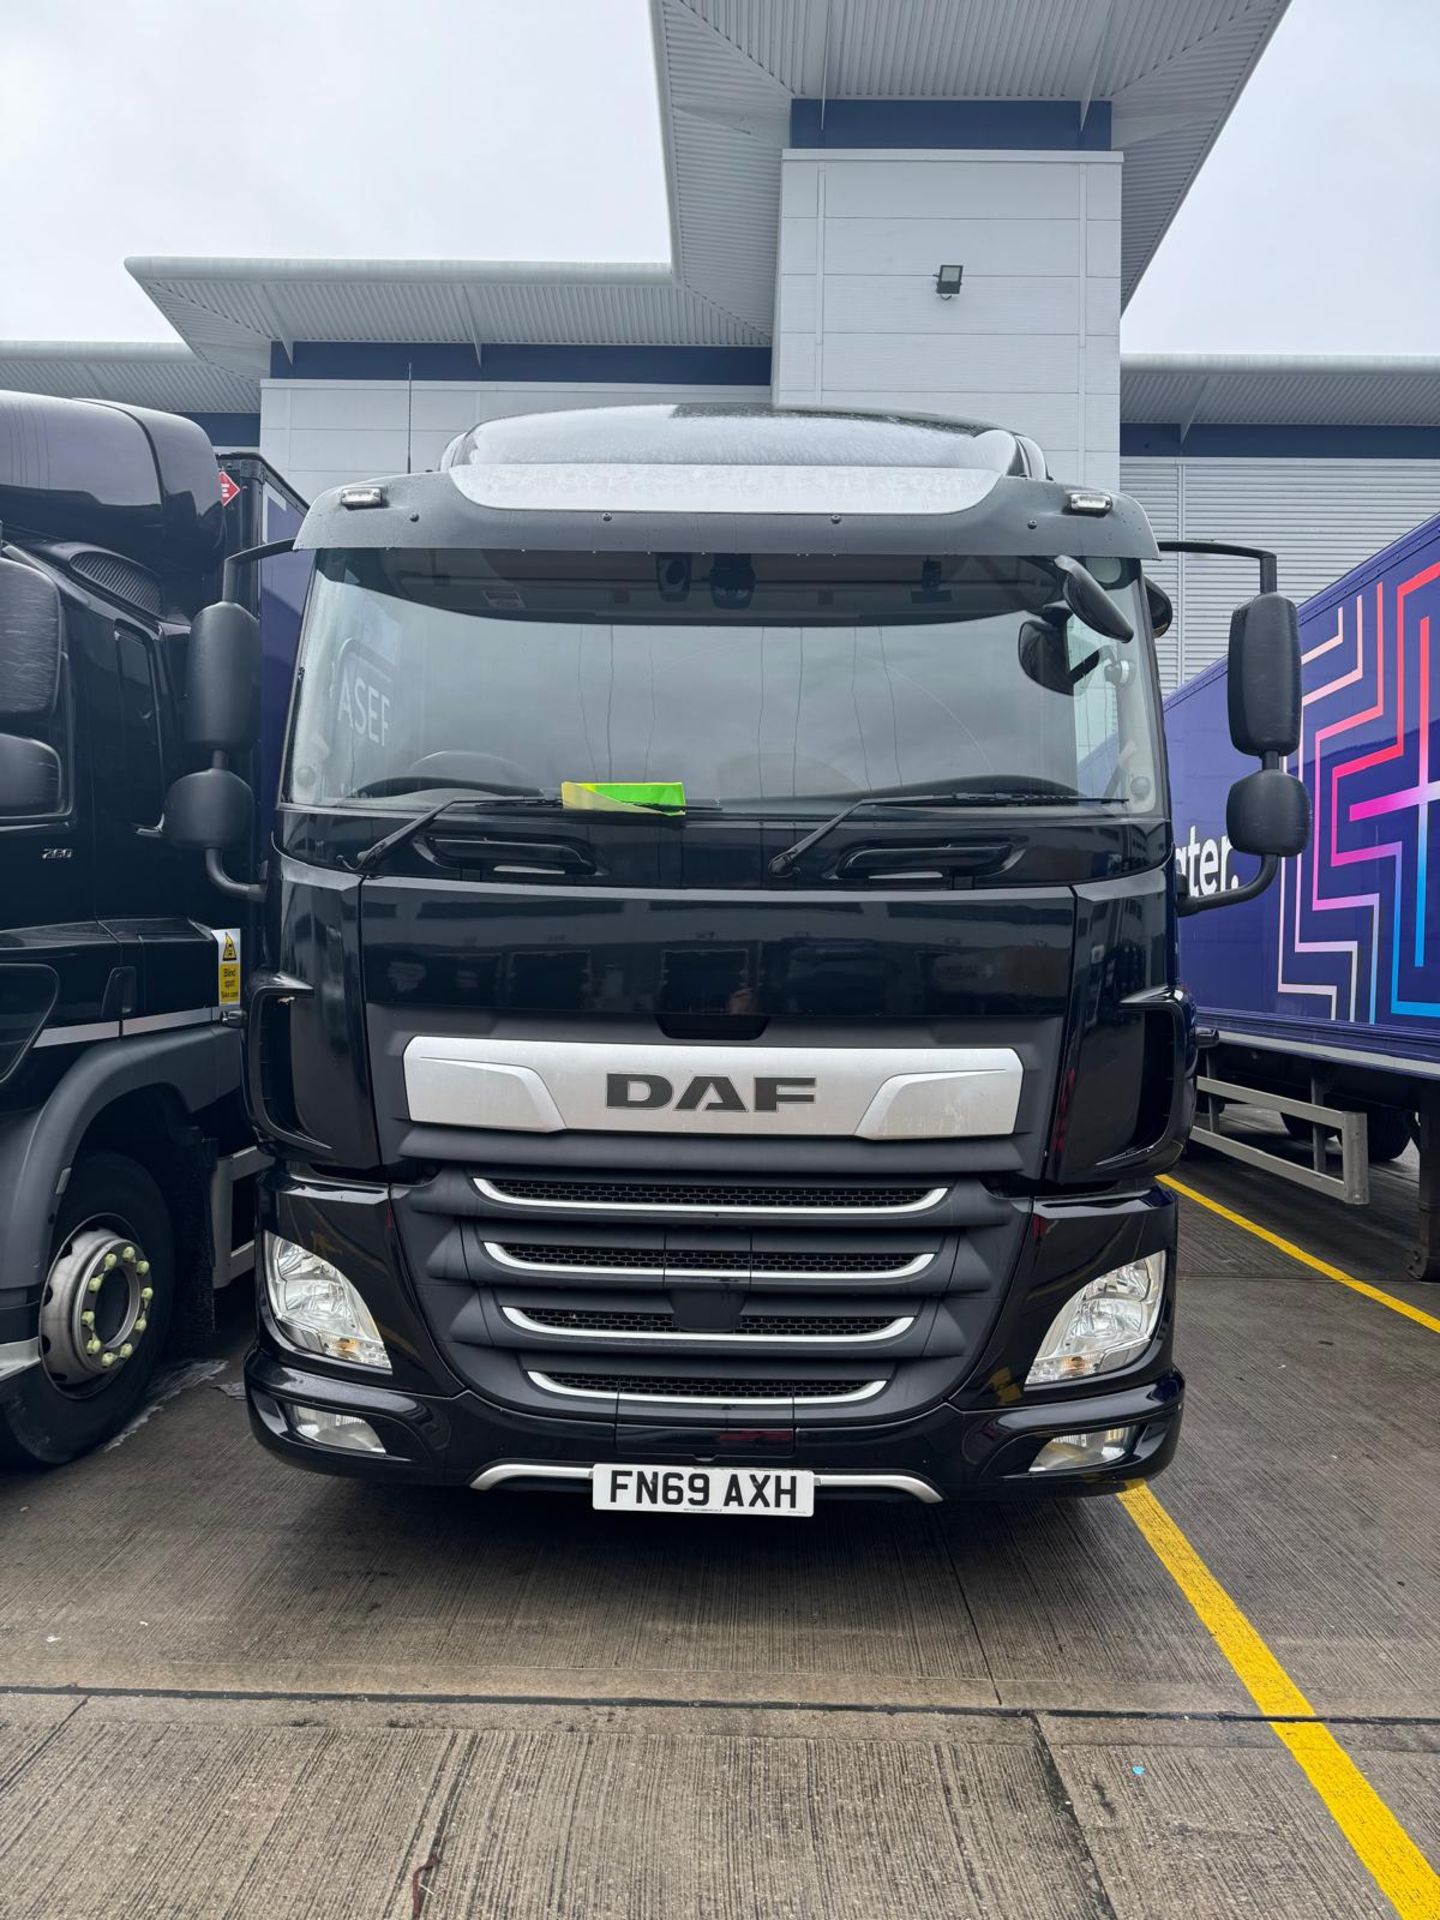 2019, DAF CF 260 FA (Ex-Fleet Owned & Maintained) - FN69 AXH (18 Ton Rigid Truck with Tail Lift) - Image 5 of 14